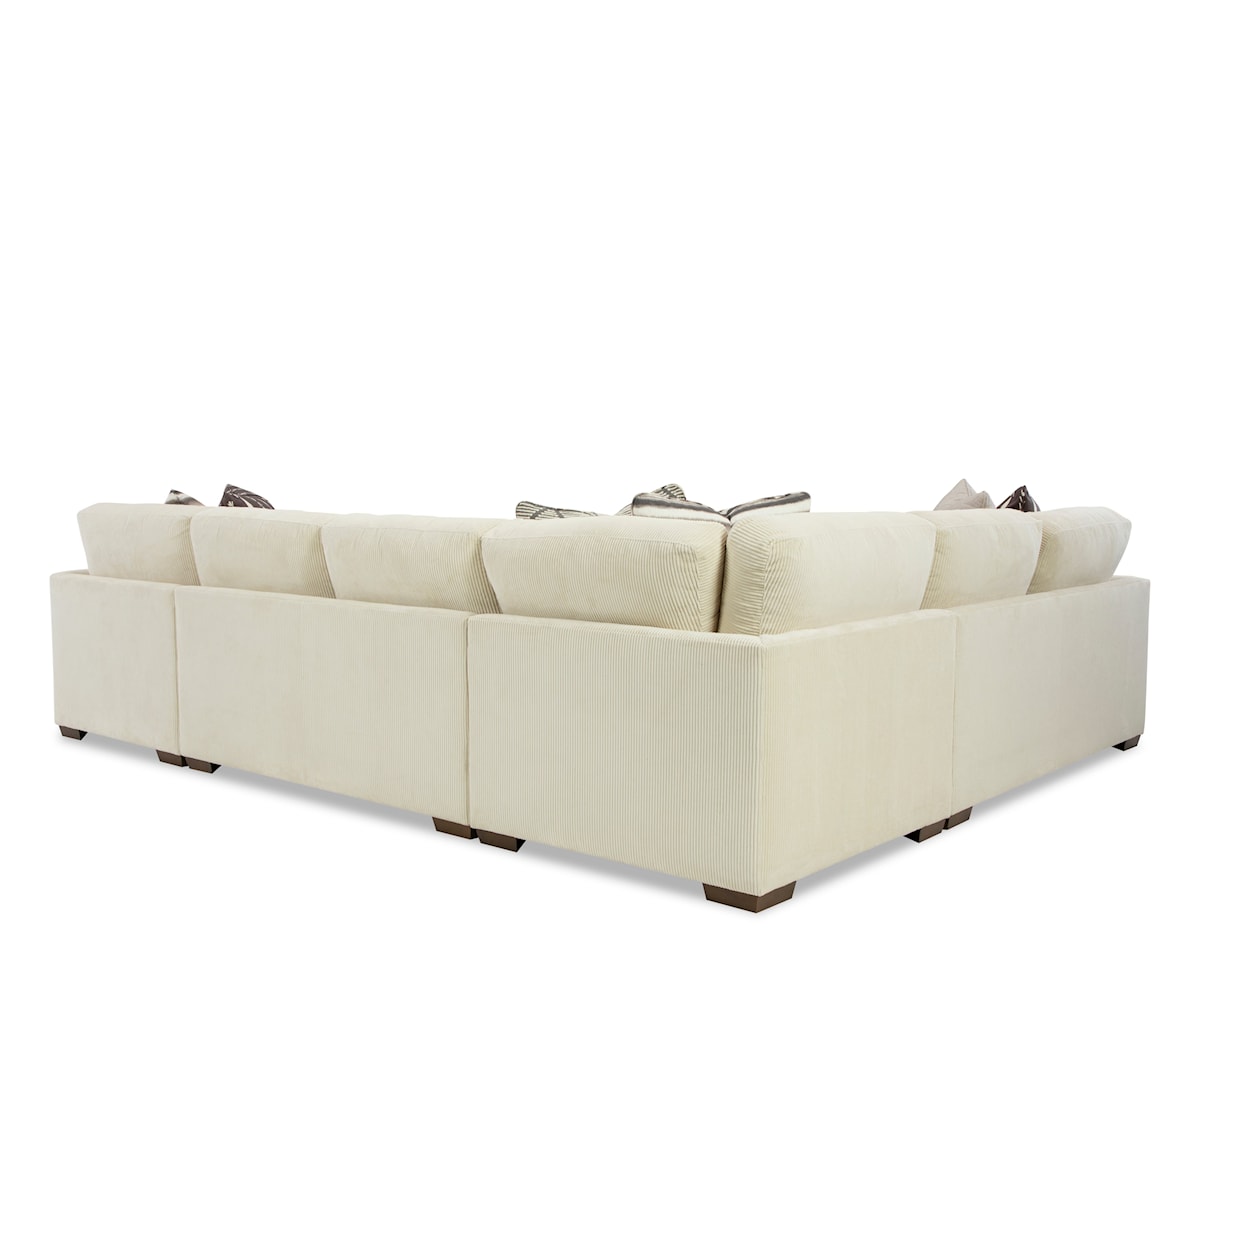 Hickorycraft 783950 5-Seat Sectional Sofa with LAF Chaise